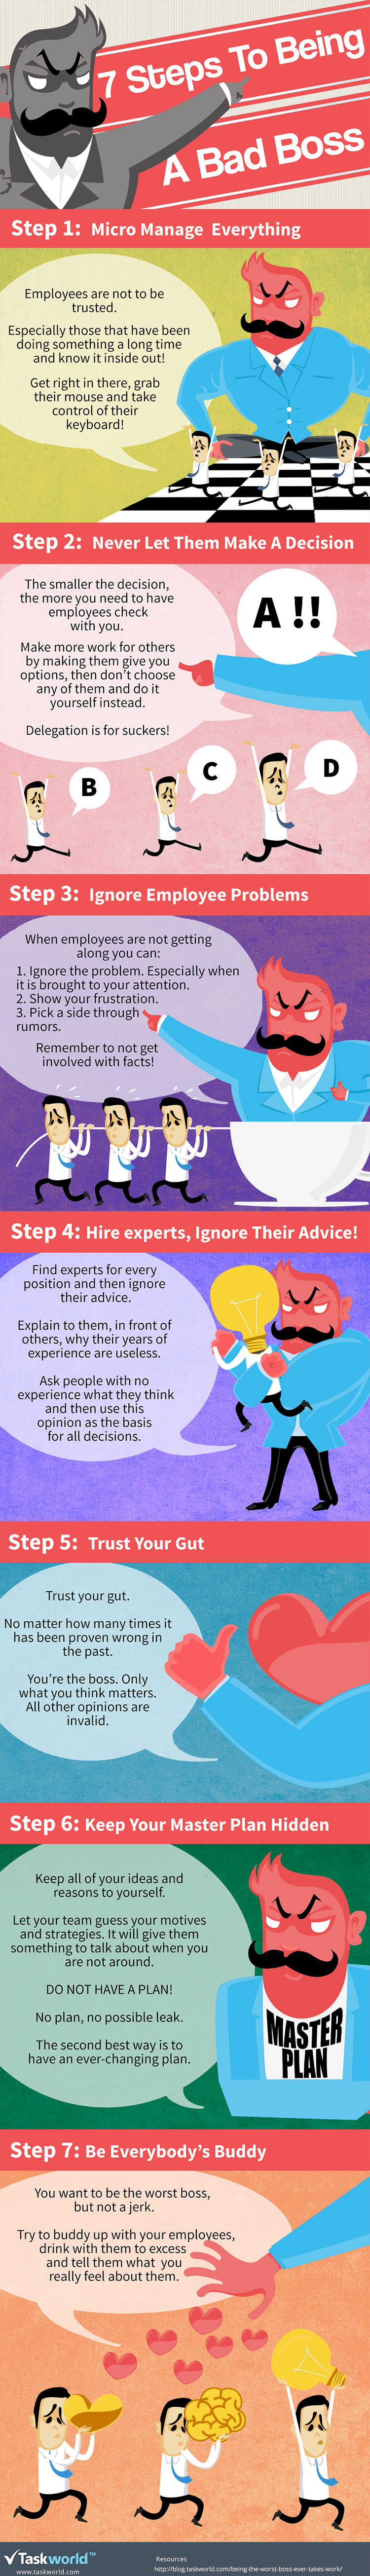 A Guide to Becoming a Bad Boss